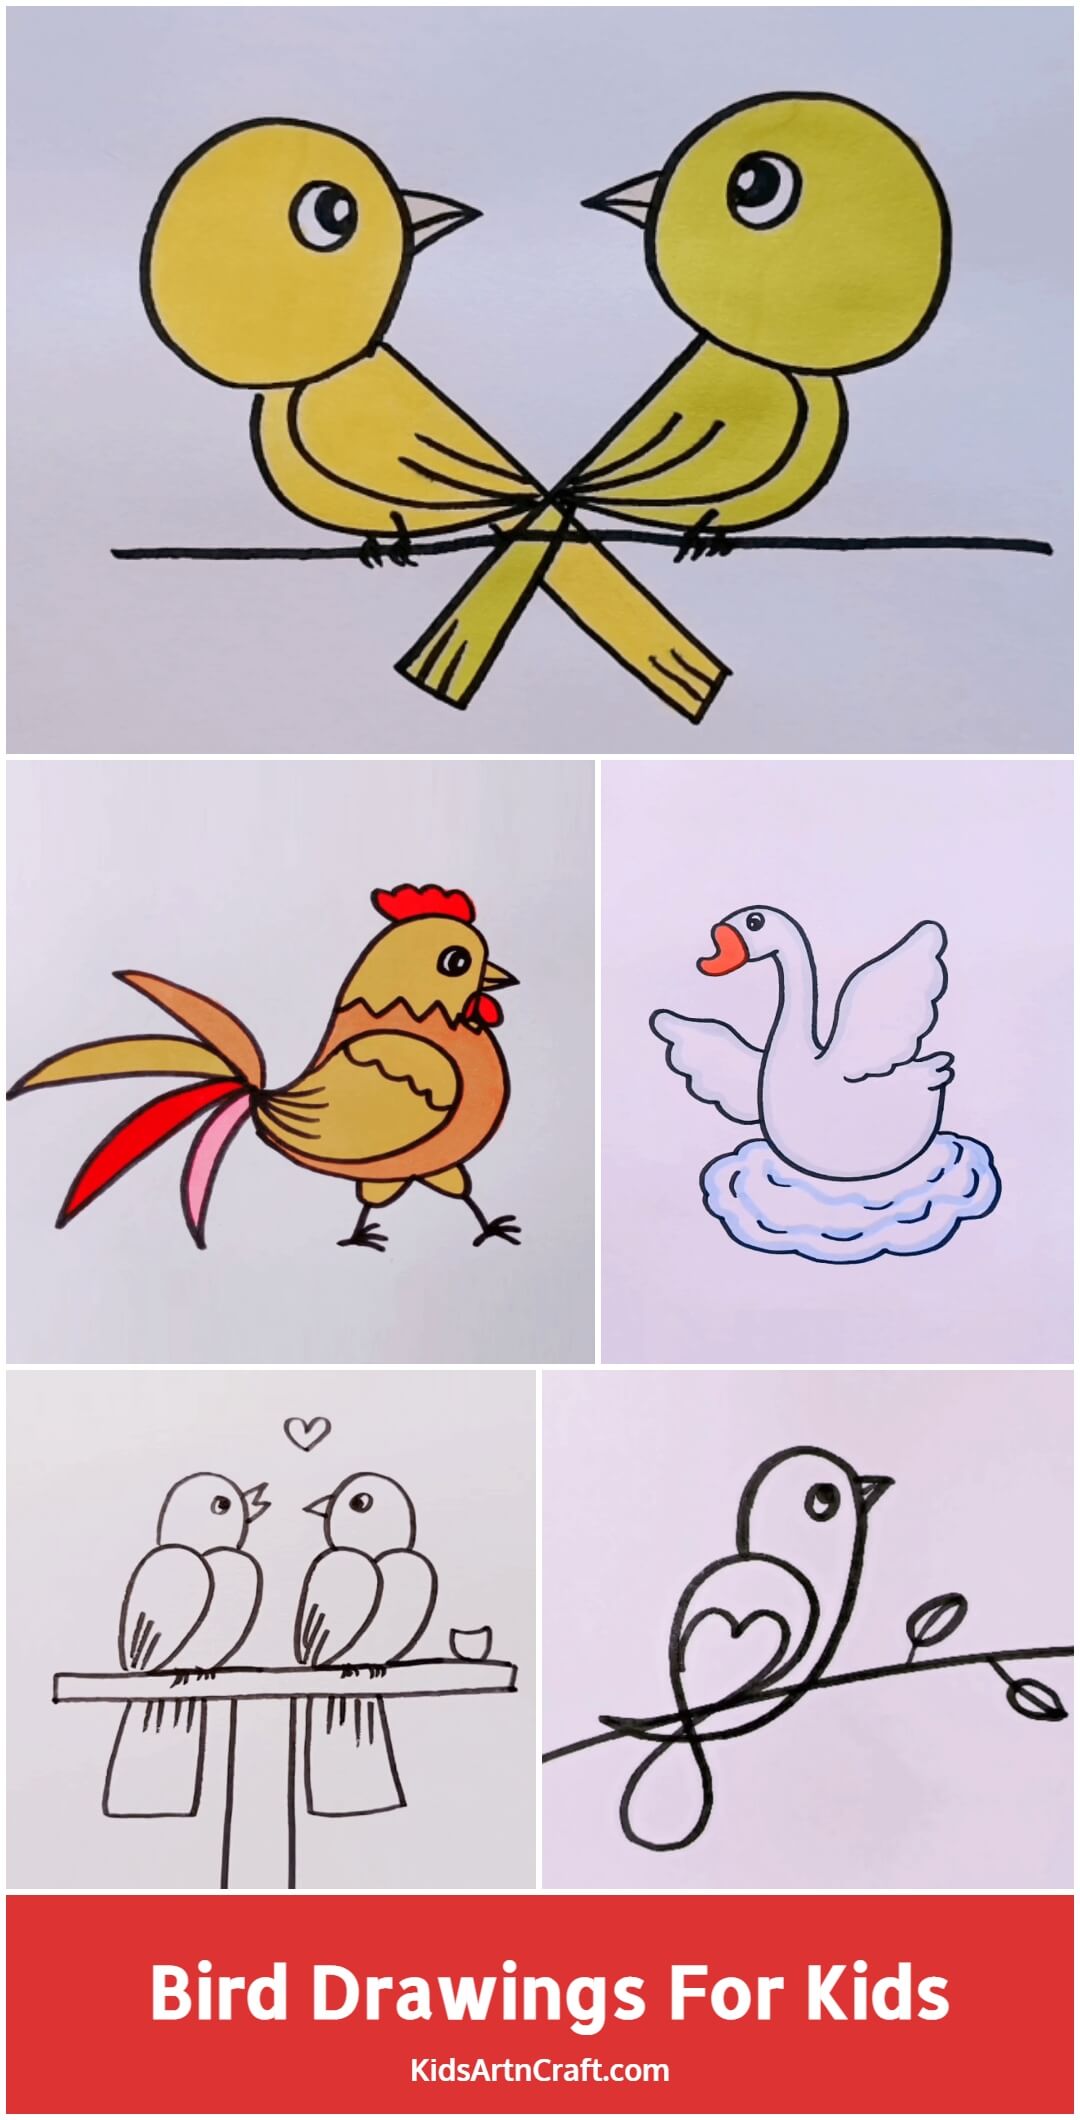 Bird Drawings For Kids